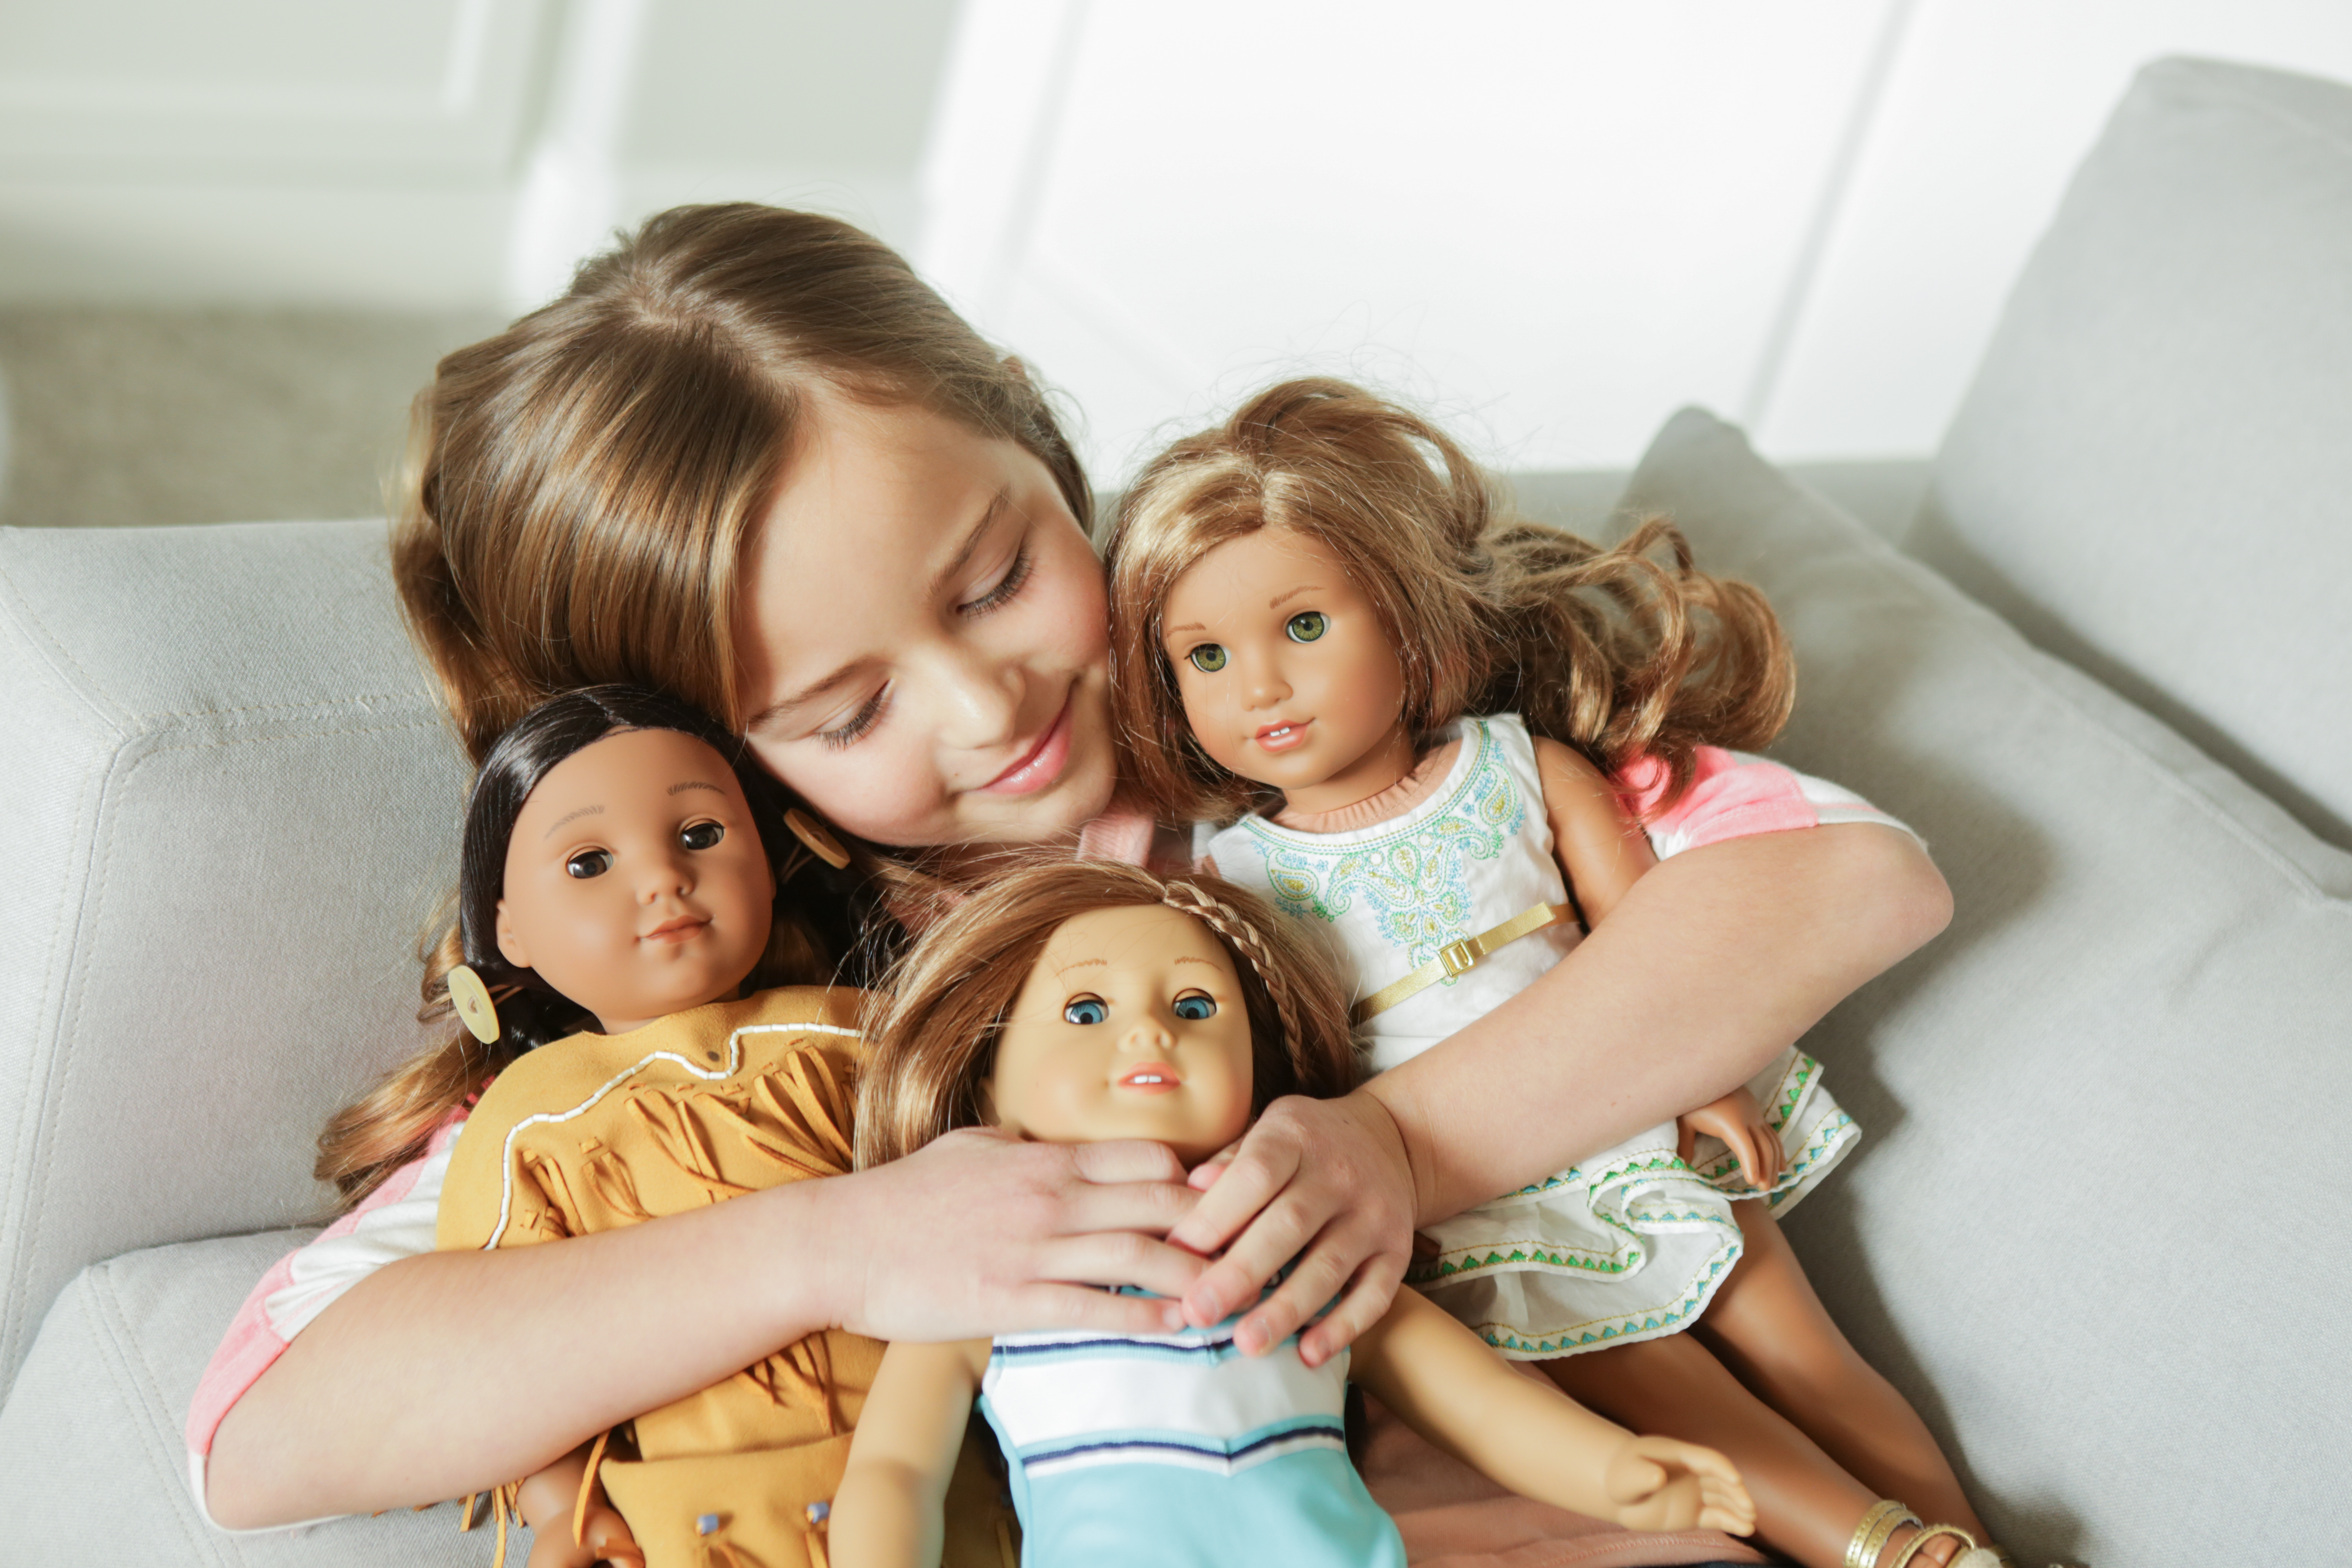 american girl doll store prices